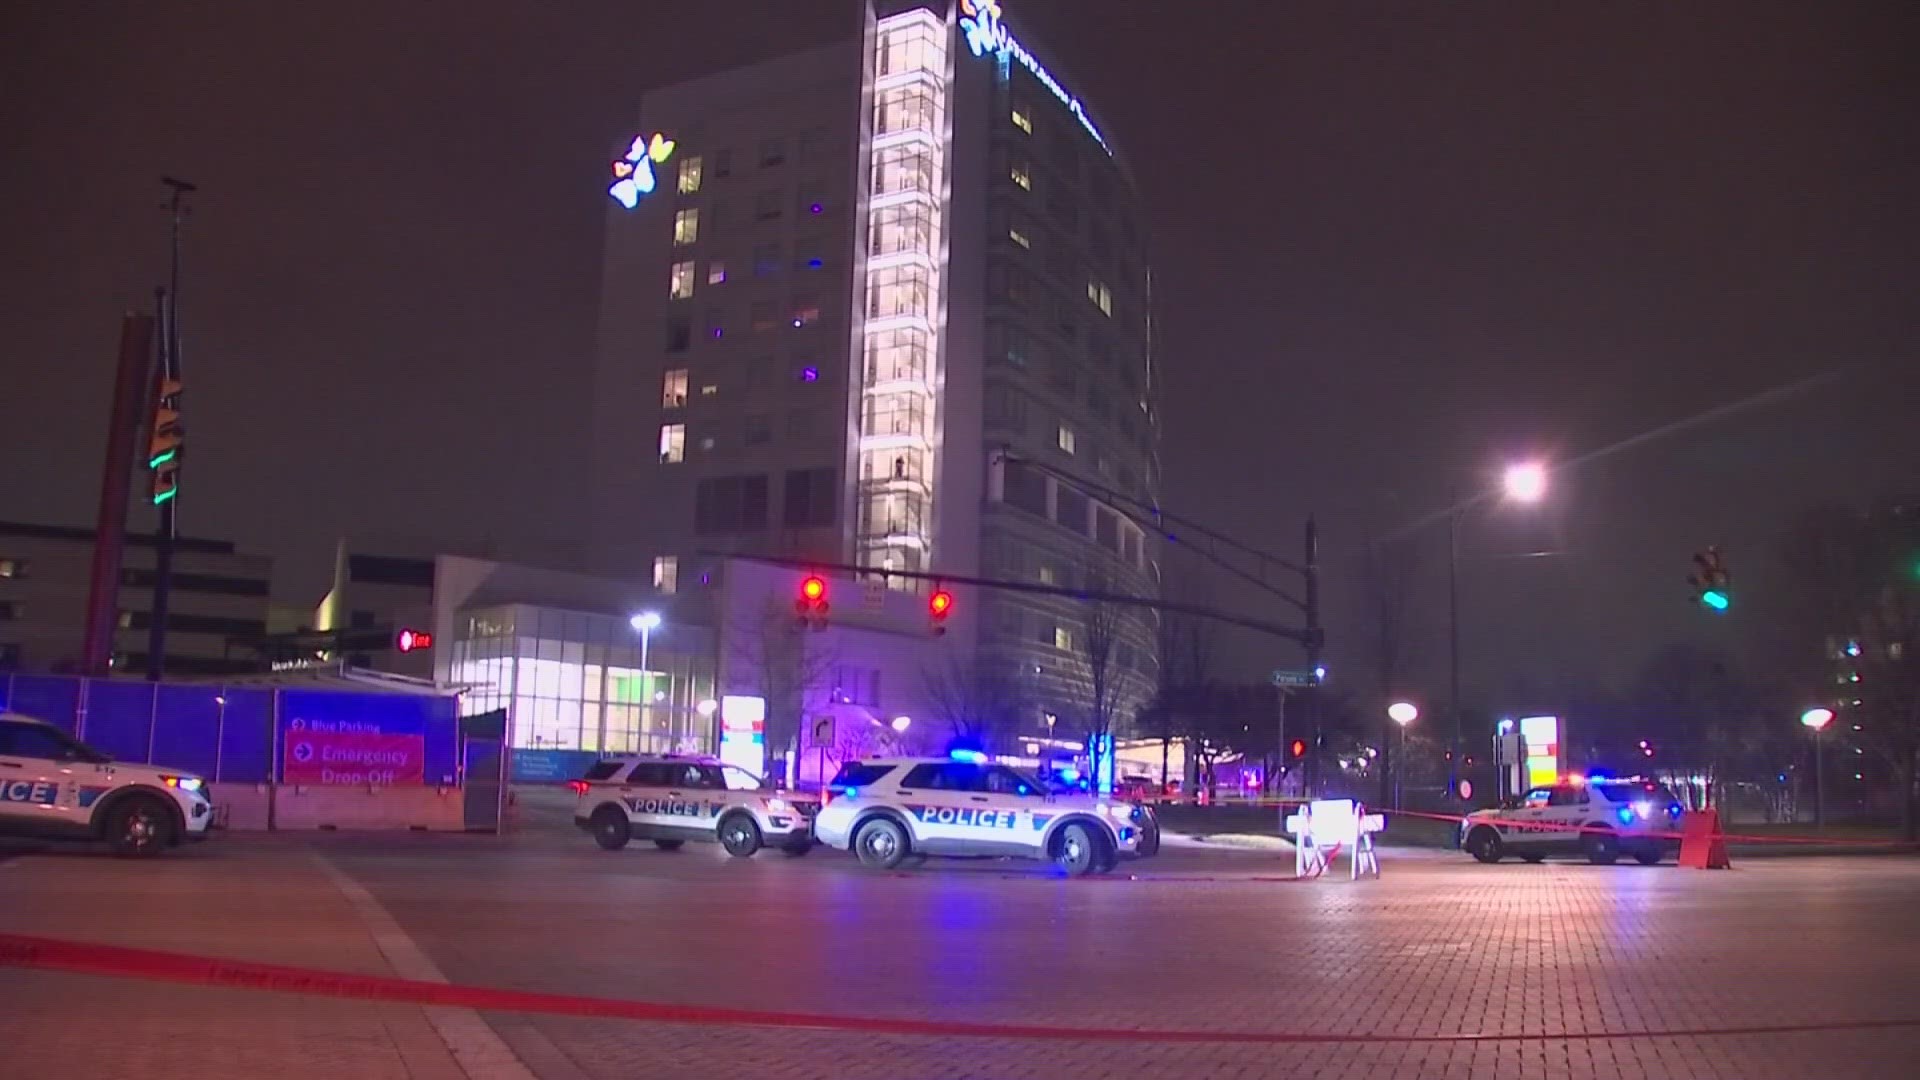 Columbus police identified the 41-year-old man who died after being shot near Nationwide Children's House